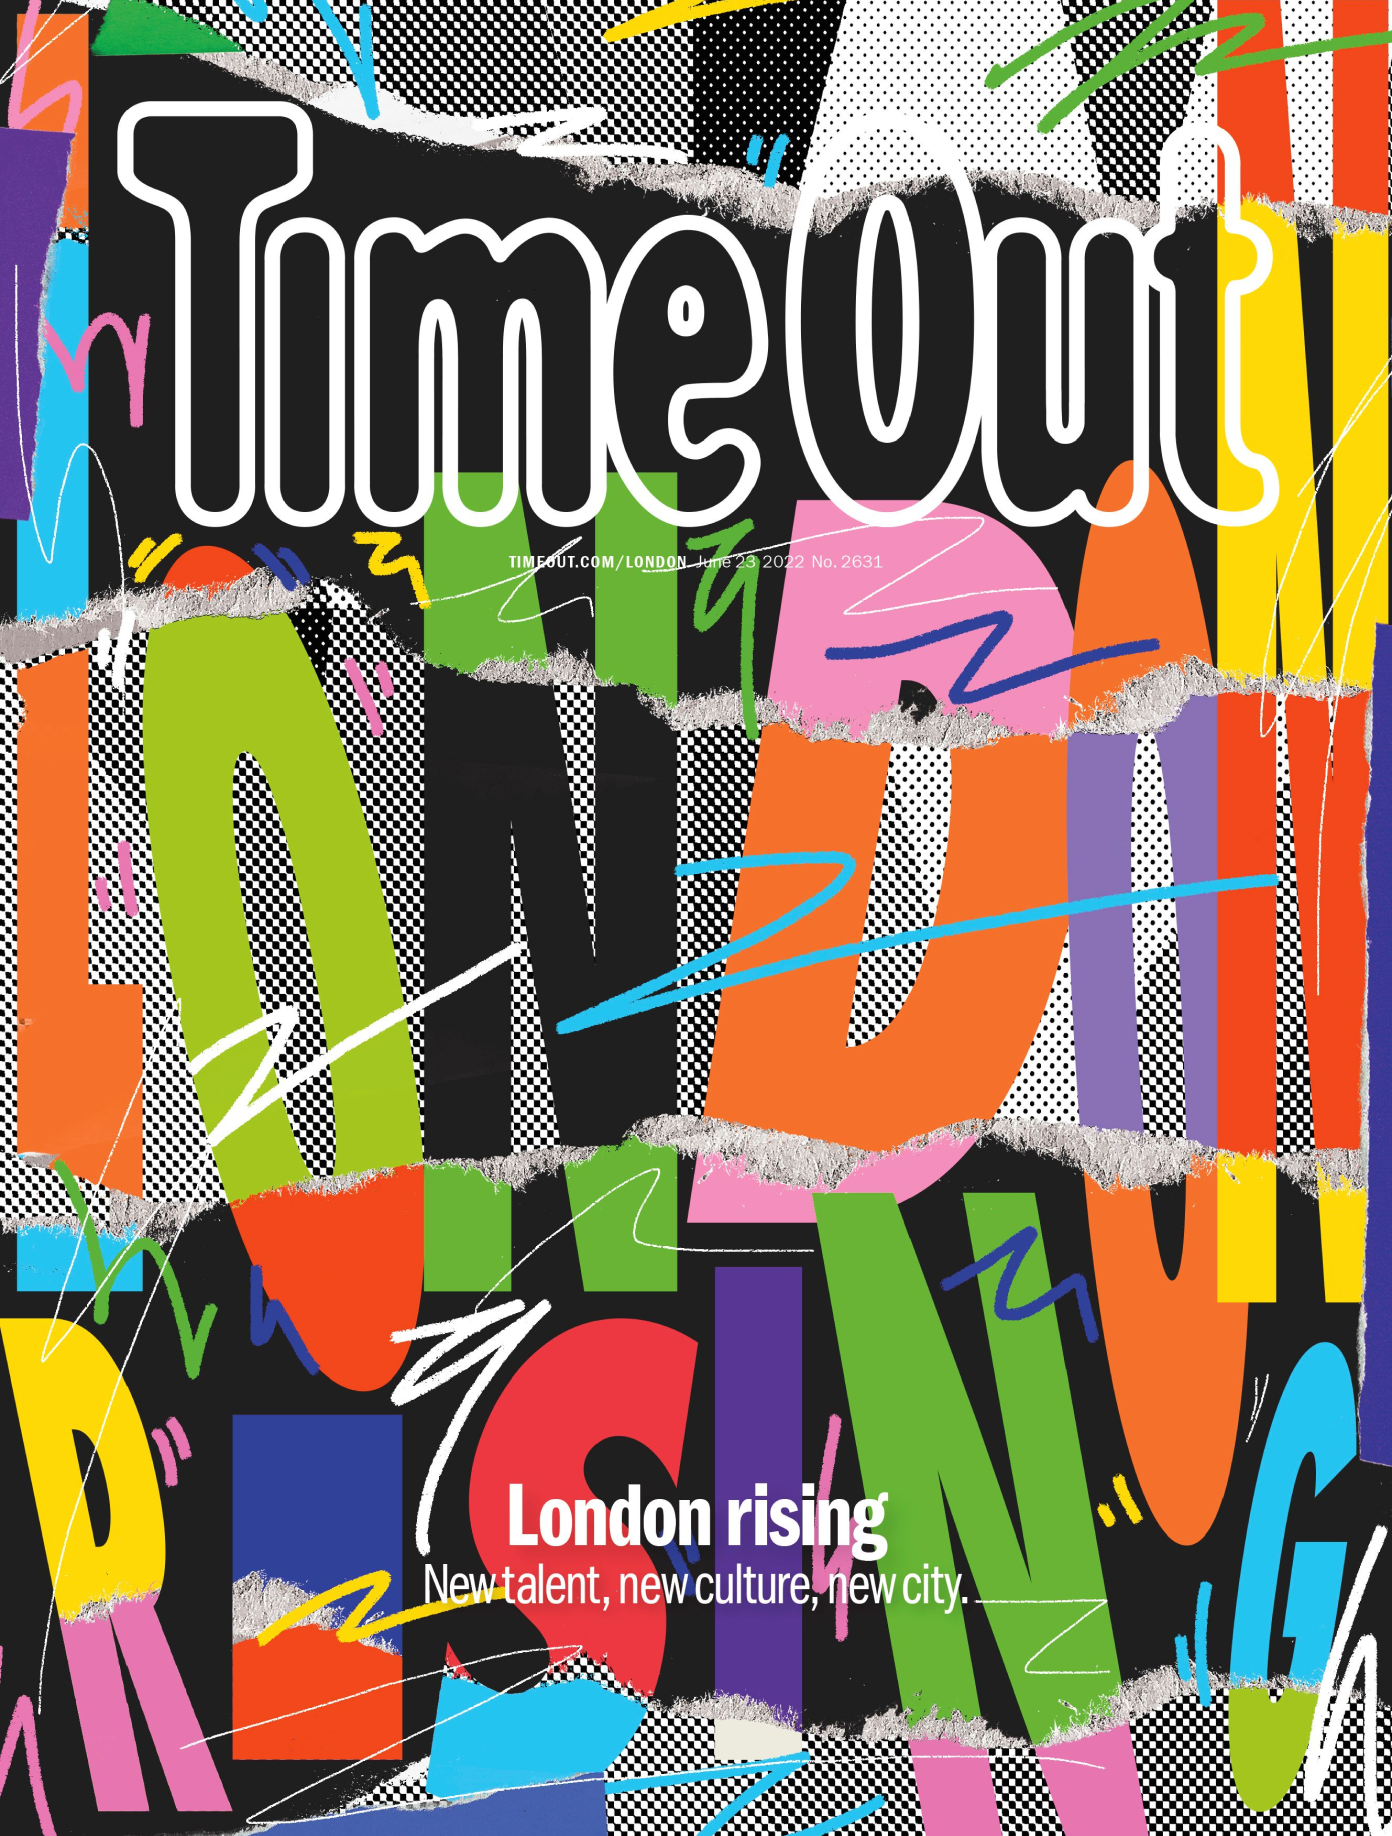 Bright coloured text artwork created by Kris Andrew Small for TimeOut London